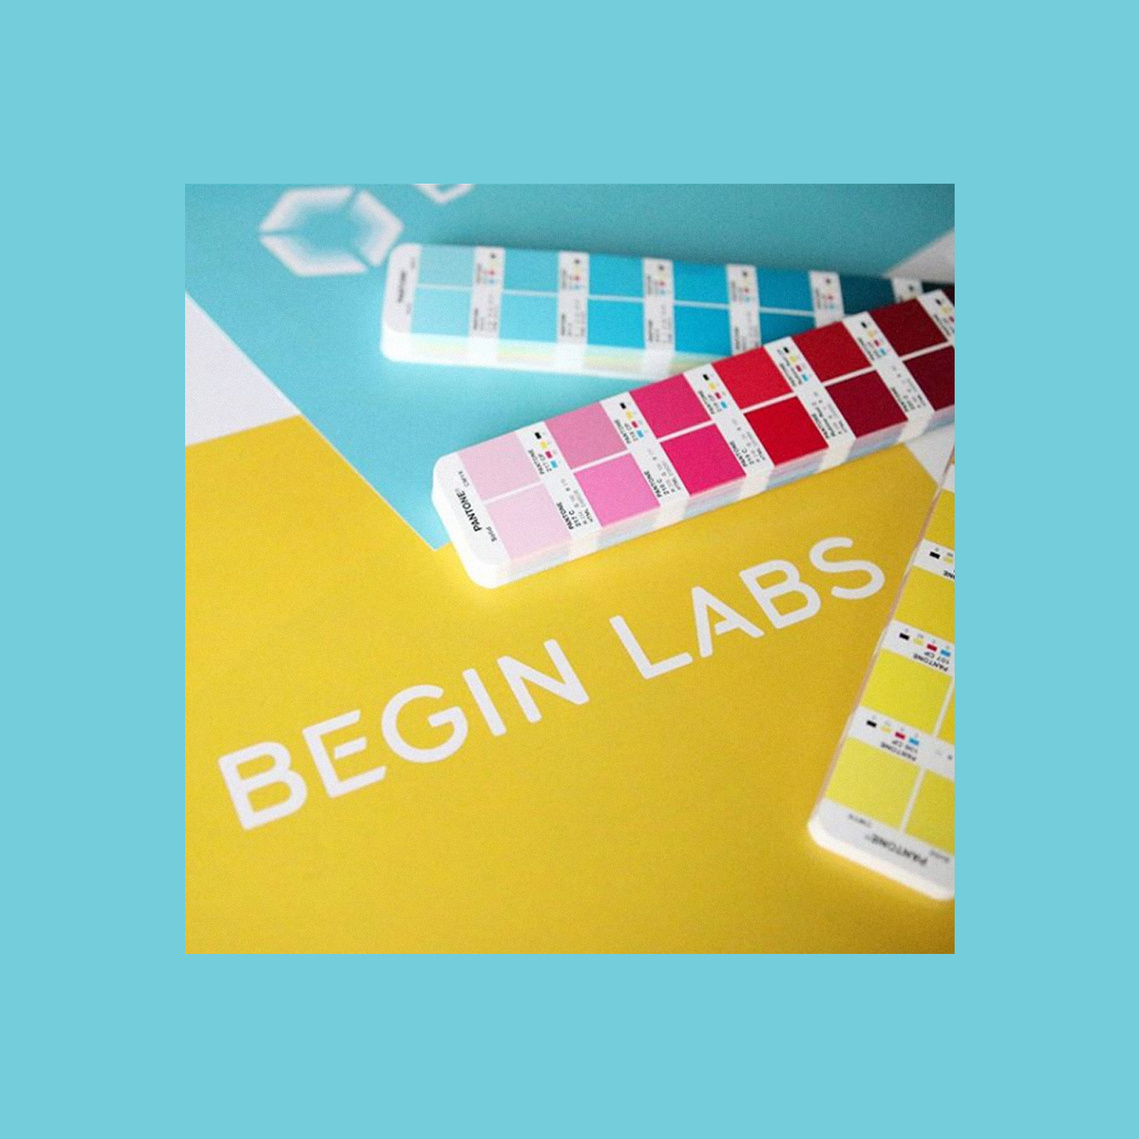 The Begin Labs logo in white on a yellow background with Pantone color booklet choices askew.